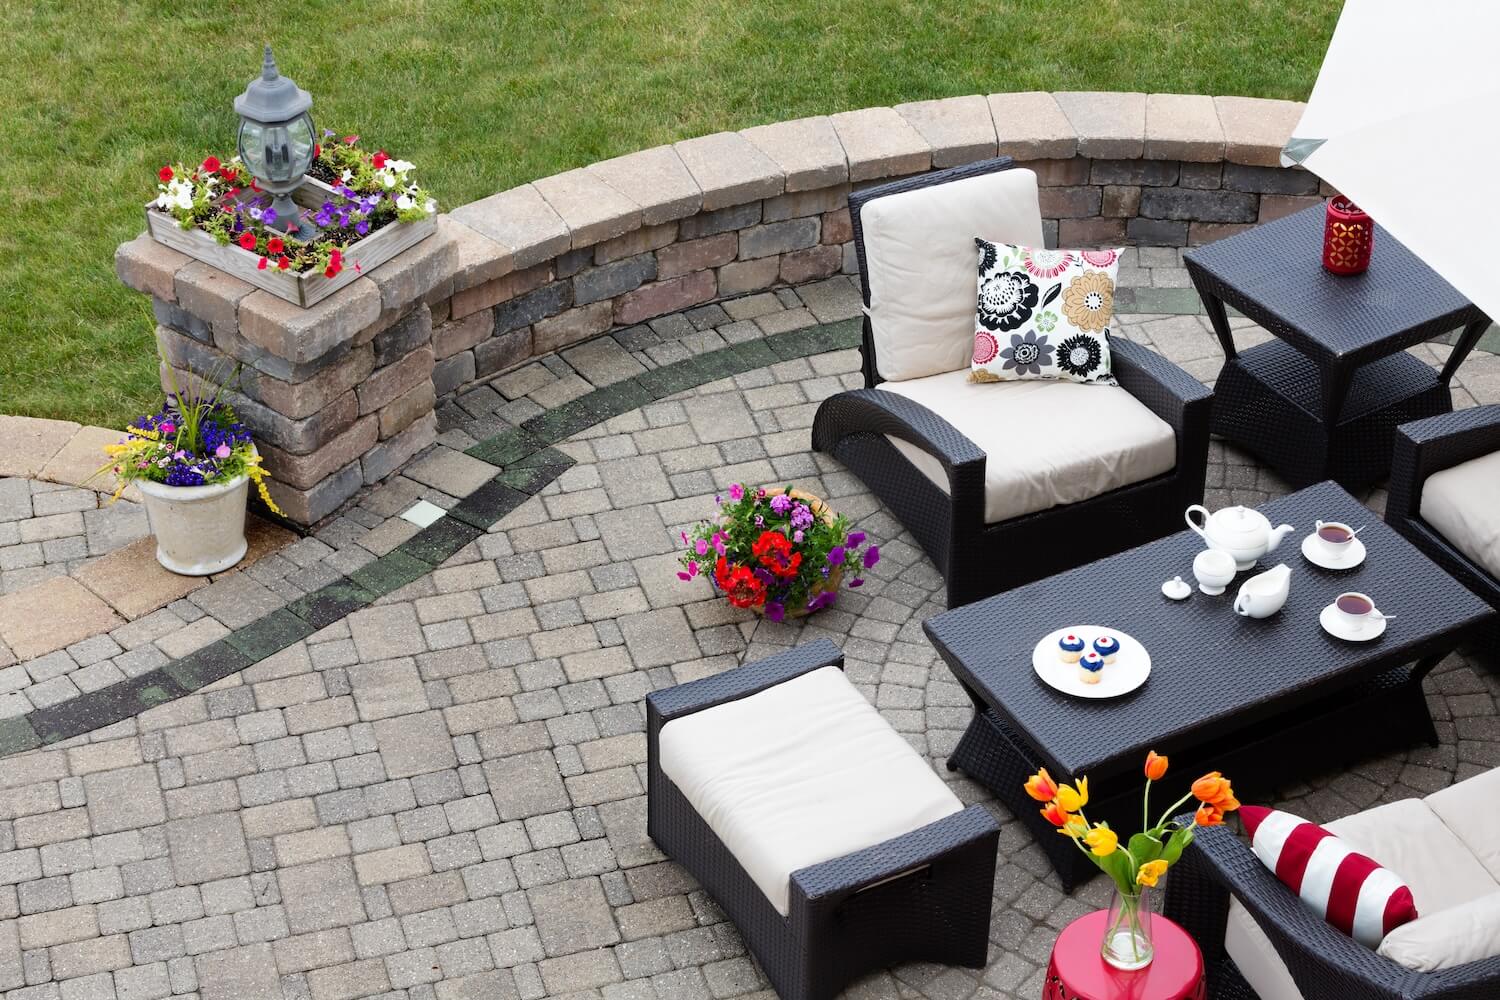 Is a Paver Patio or Deck Right for Your Backyard?